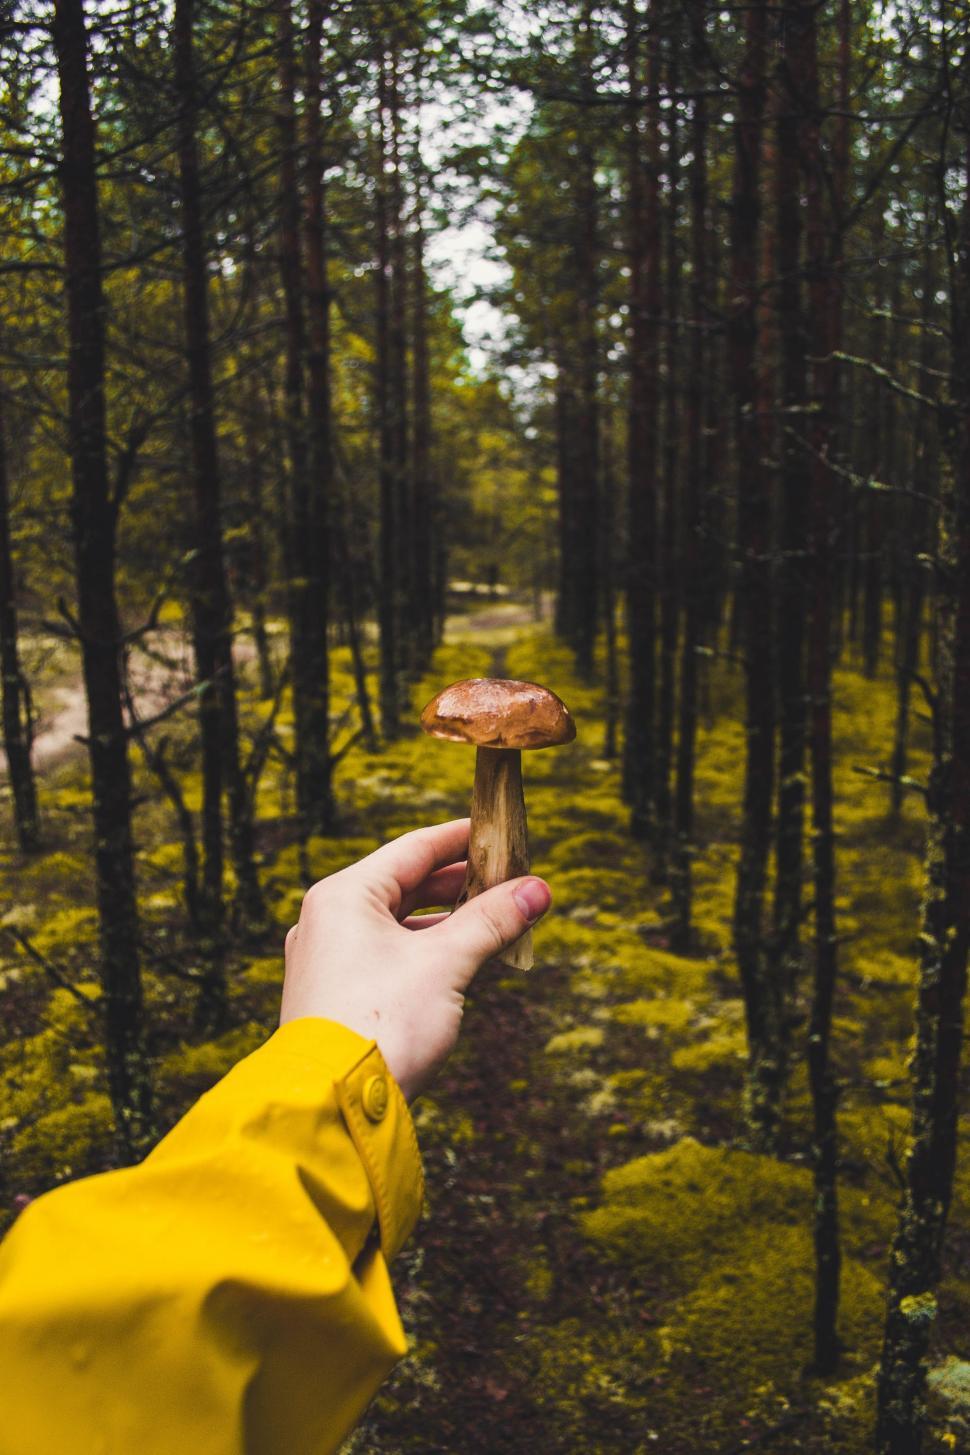 Free Image of Person Holding a Mushroom in a Forest 